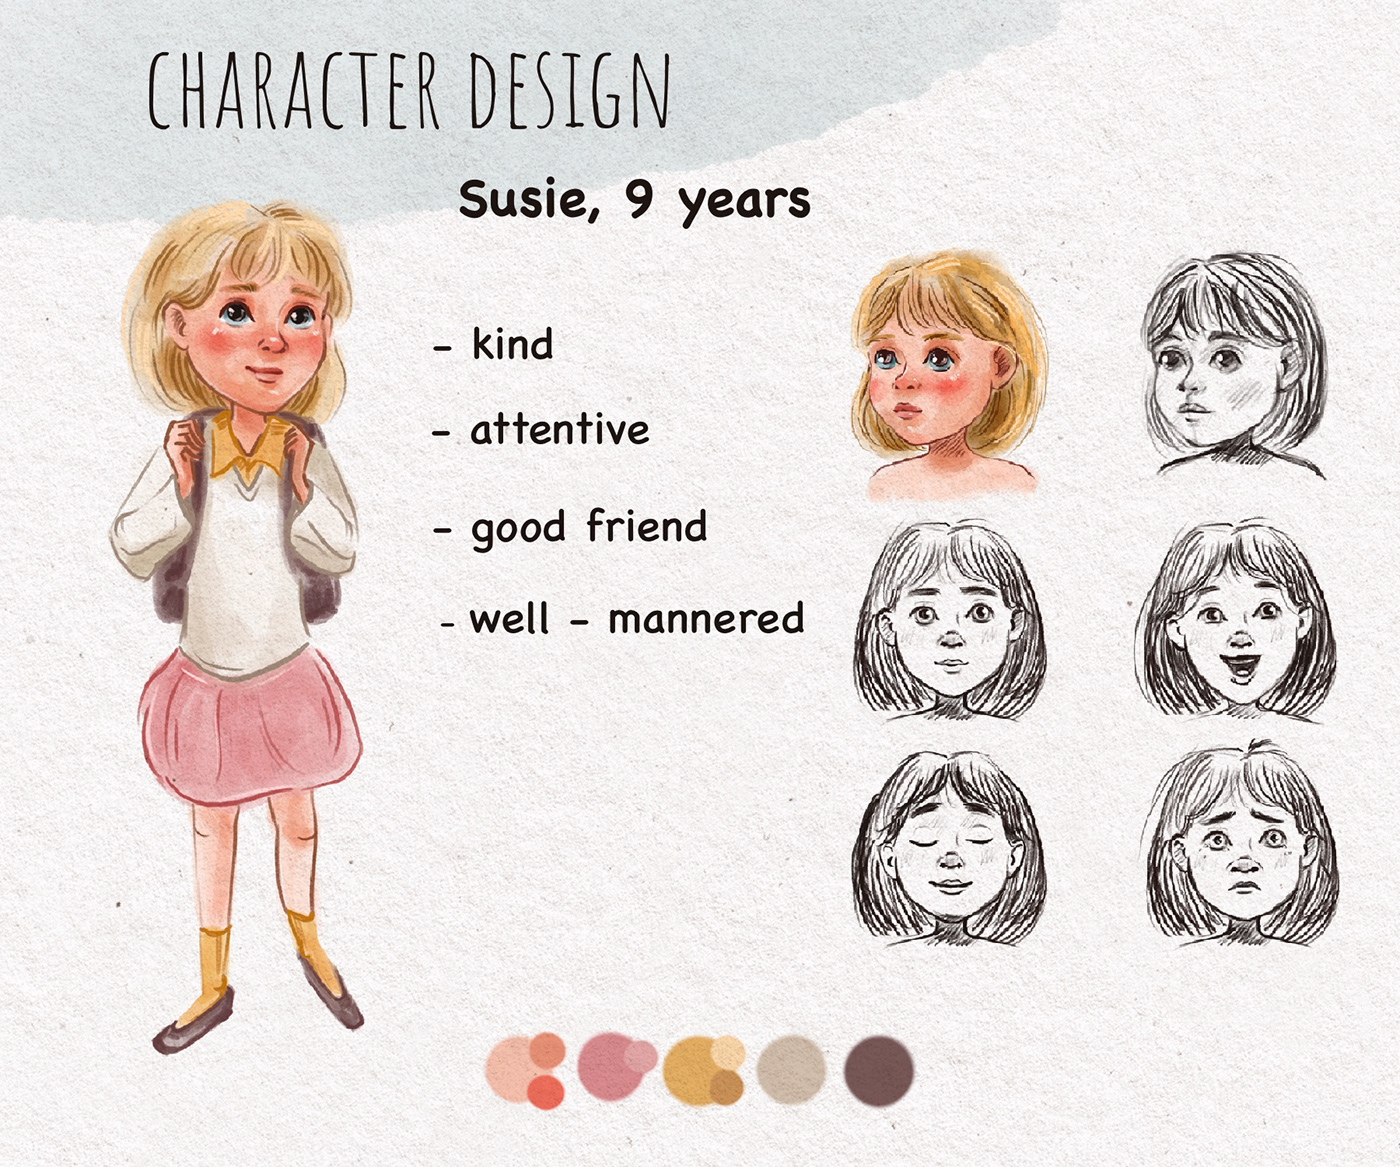 Girl Suzy, 9 years old. A character for the book